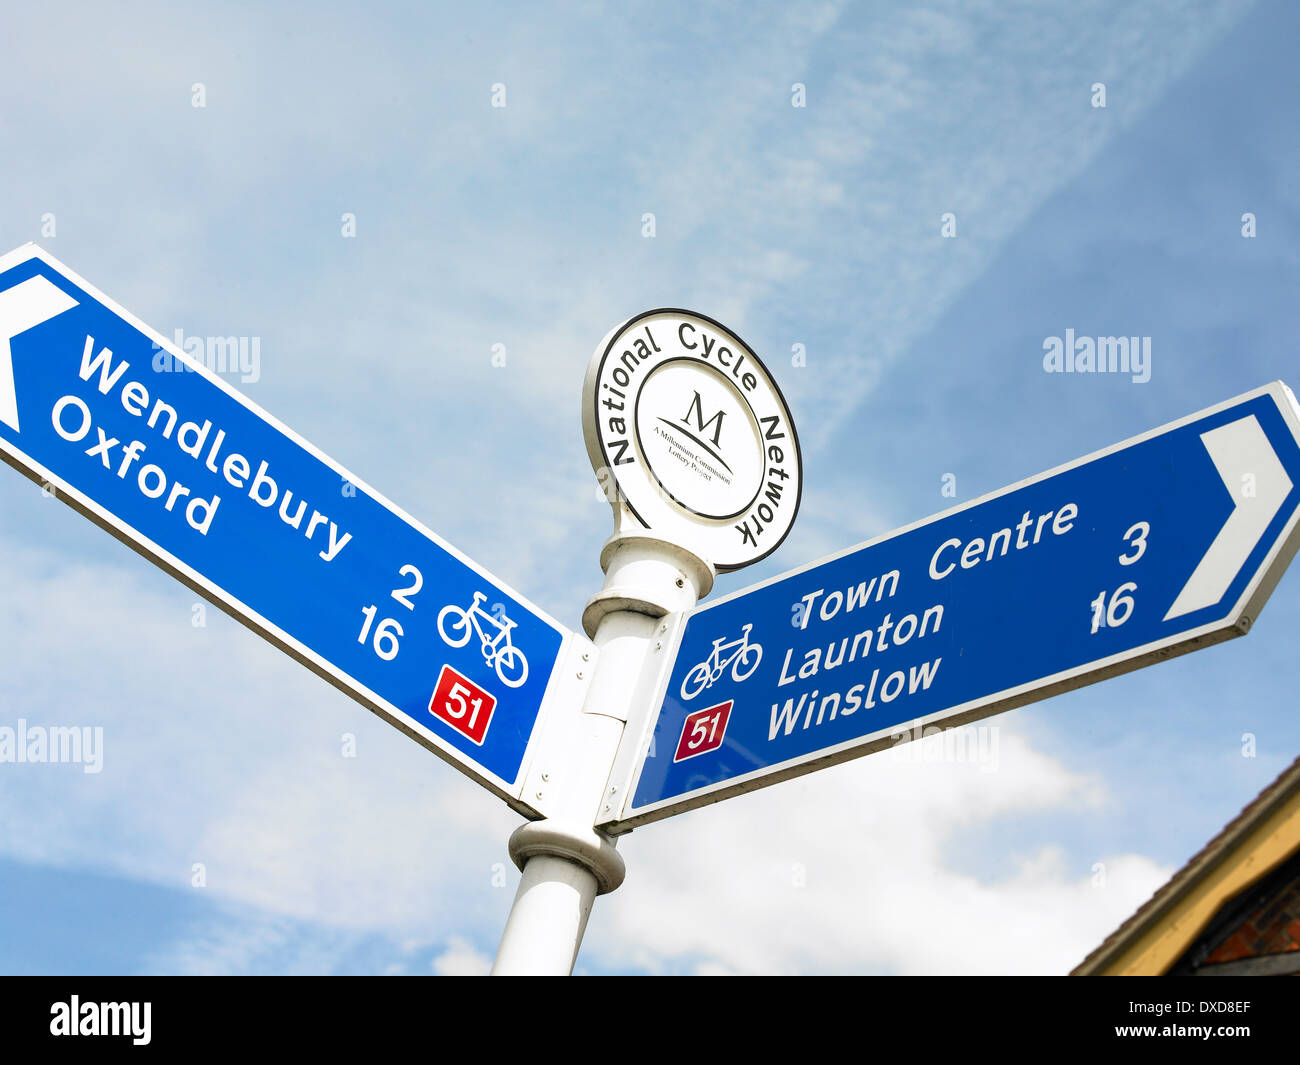 Wendlebury and Oxford sign post Stock Photo